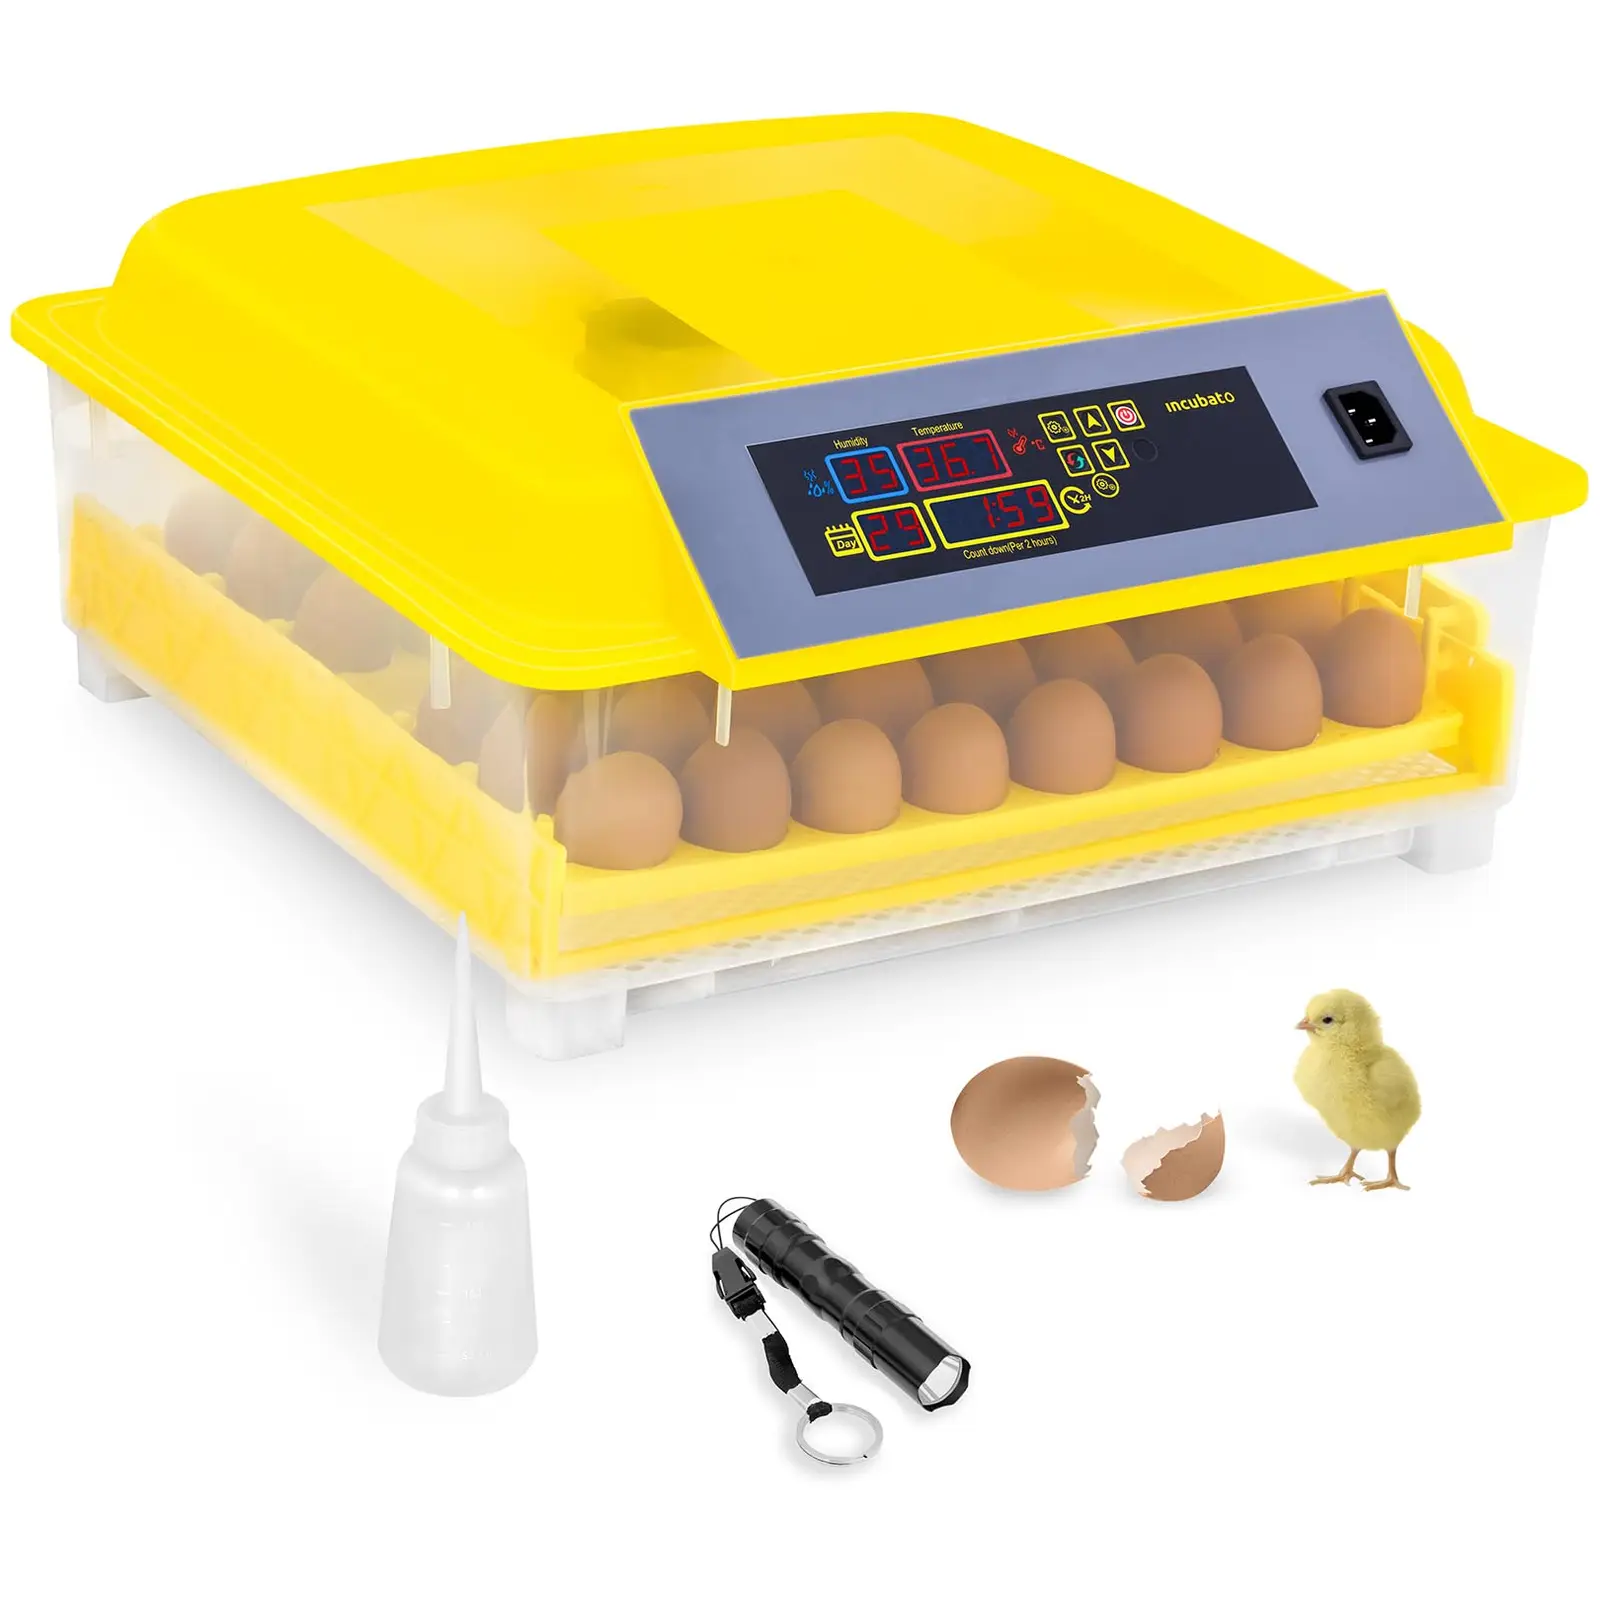 Egg Incubator - 48 Eggs - Incl. Egg Candler and Water Dispenser - Fully Automatic